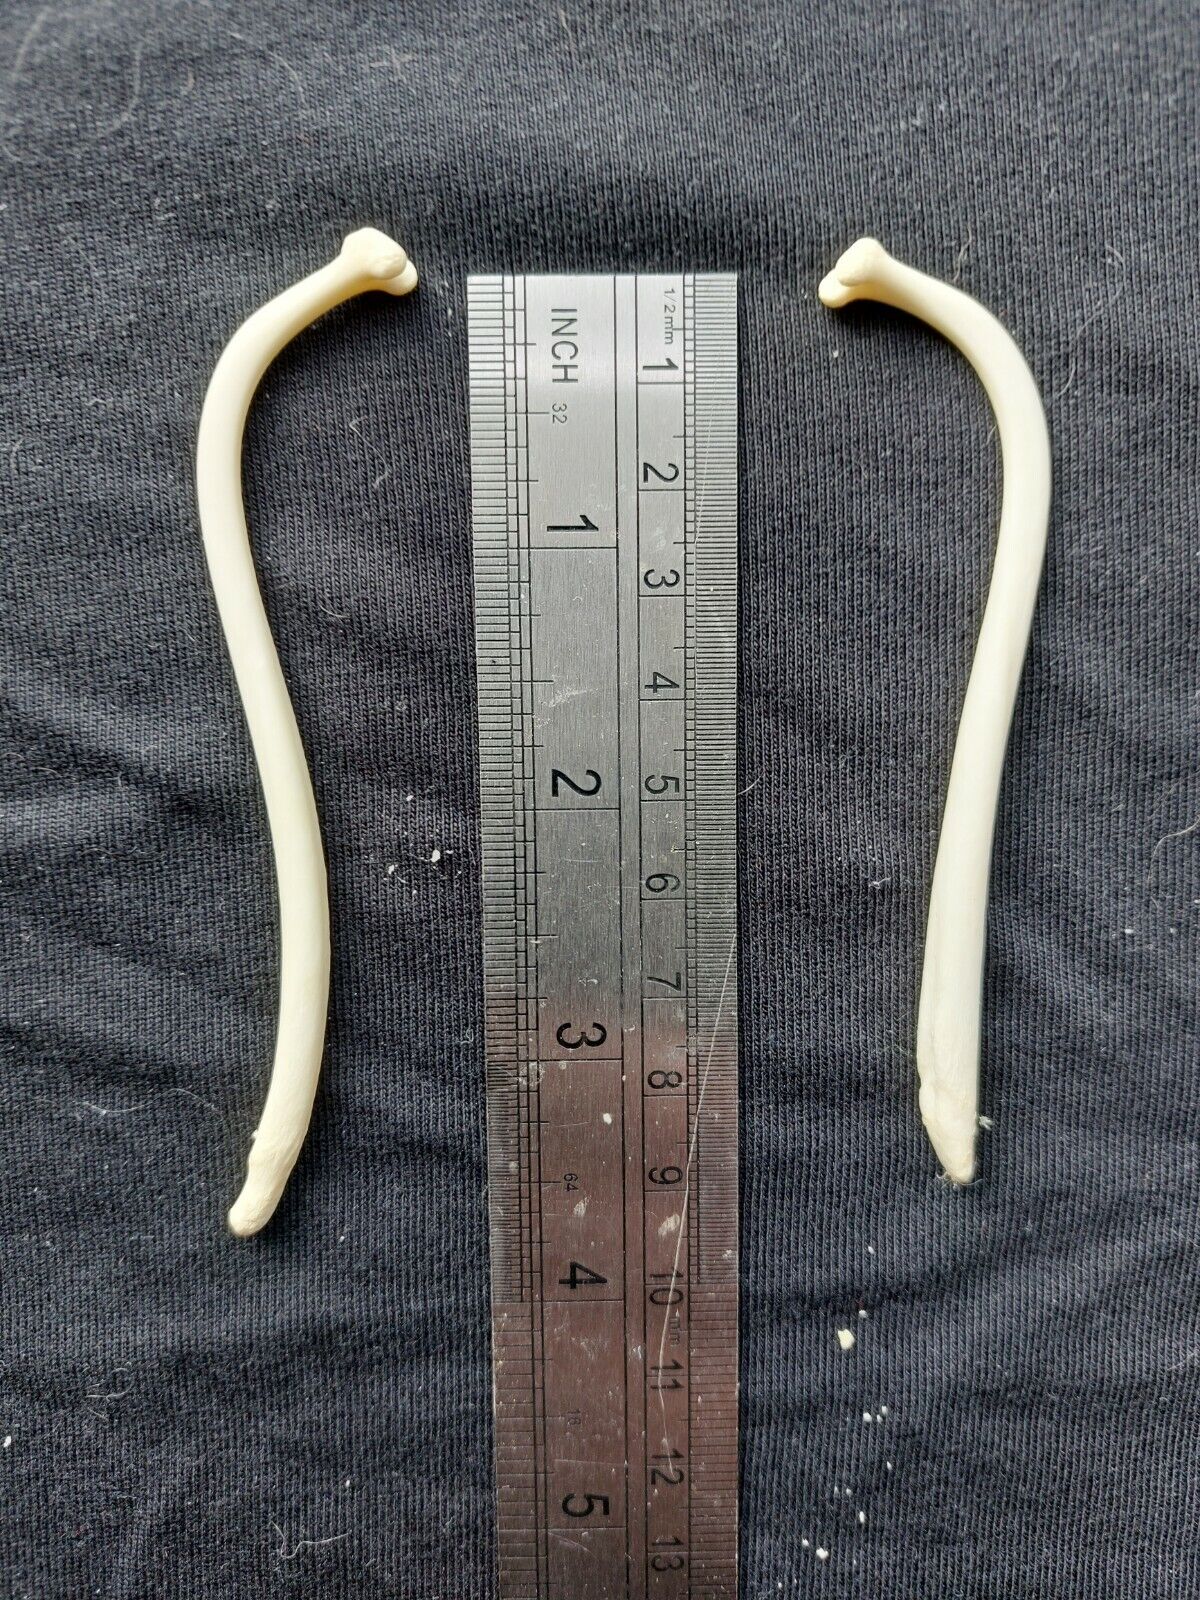 Real Genuine Raccoon Baculum Penis Bone Curio Collectible Gothic Taxidermy